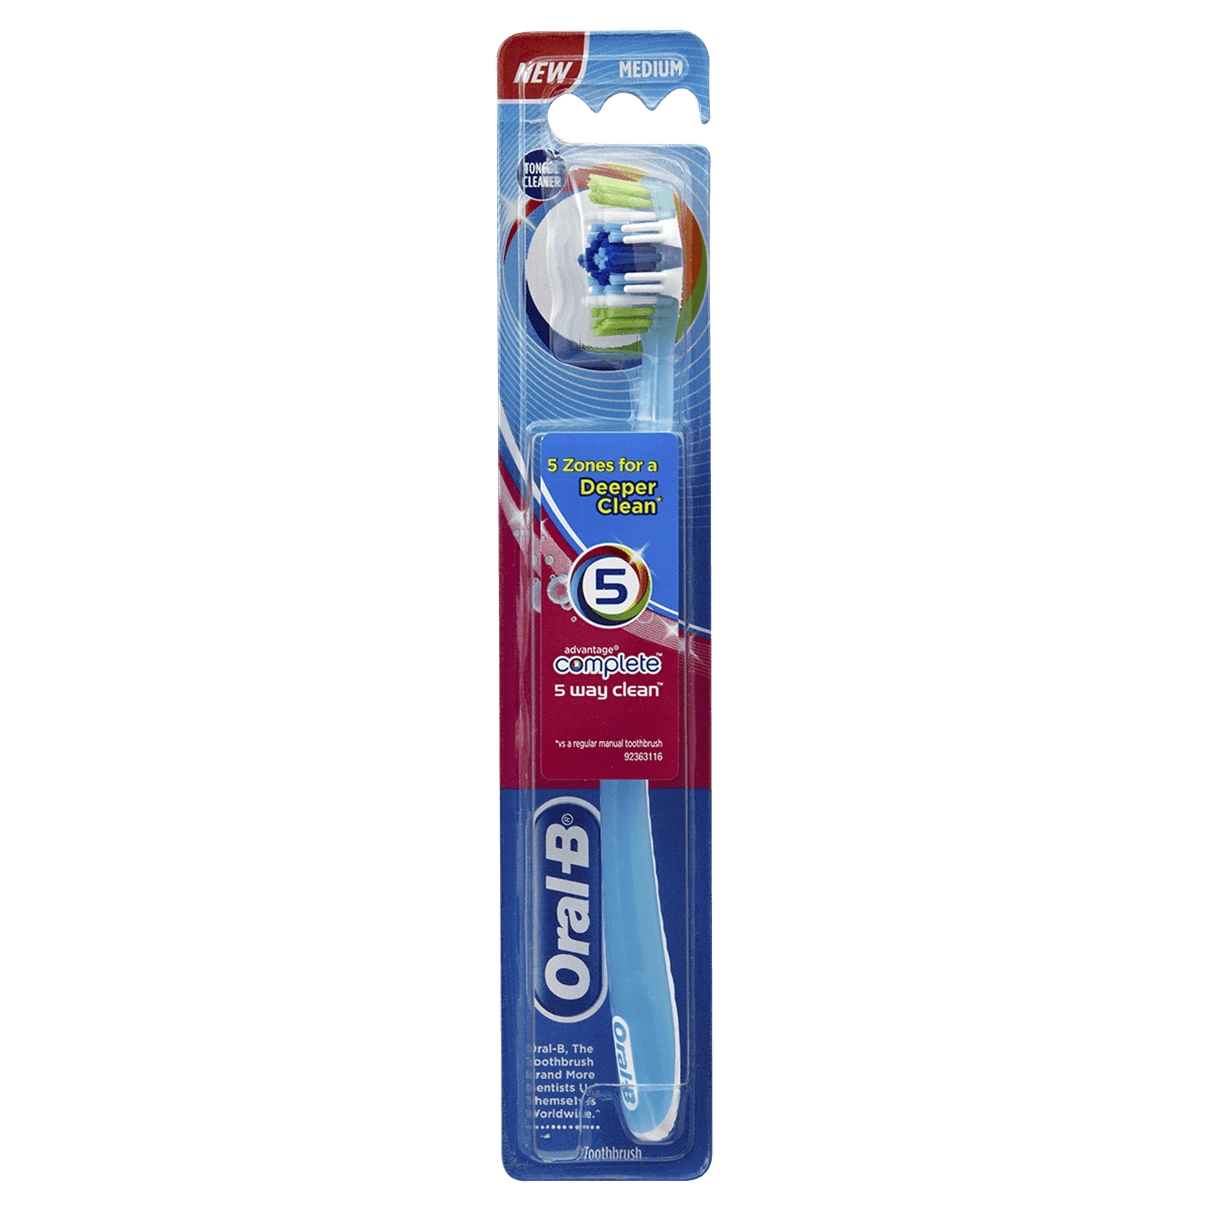 Oral-B Advantage Complete 5-Way Clean Toothbrush